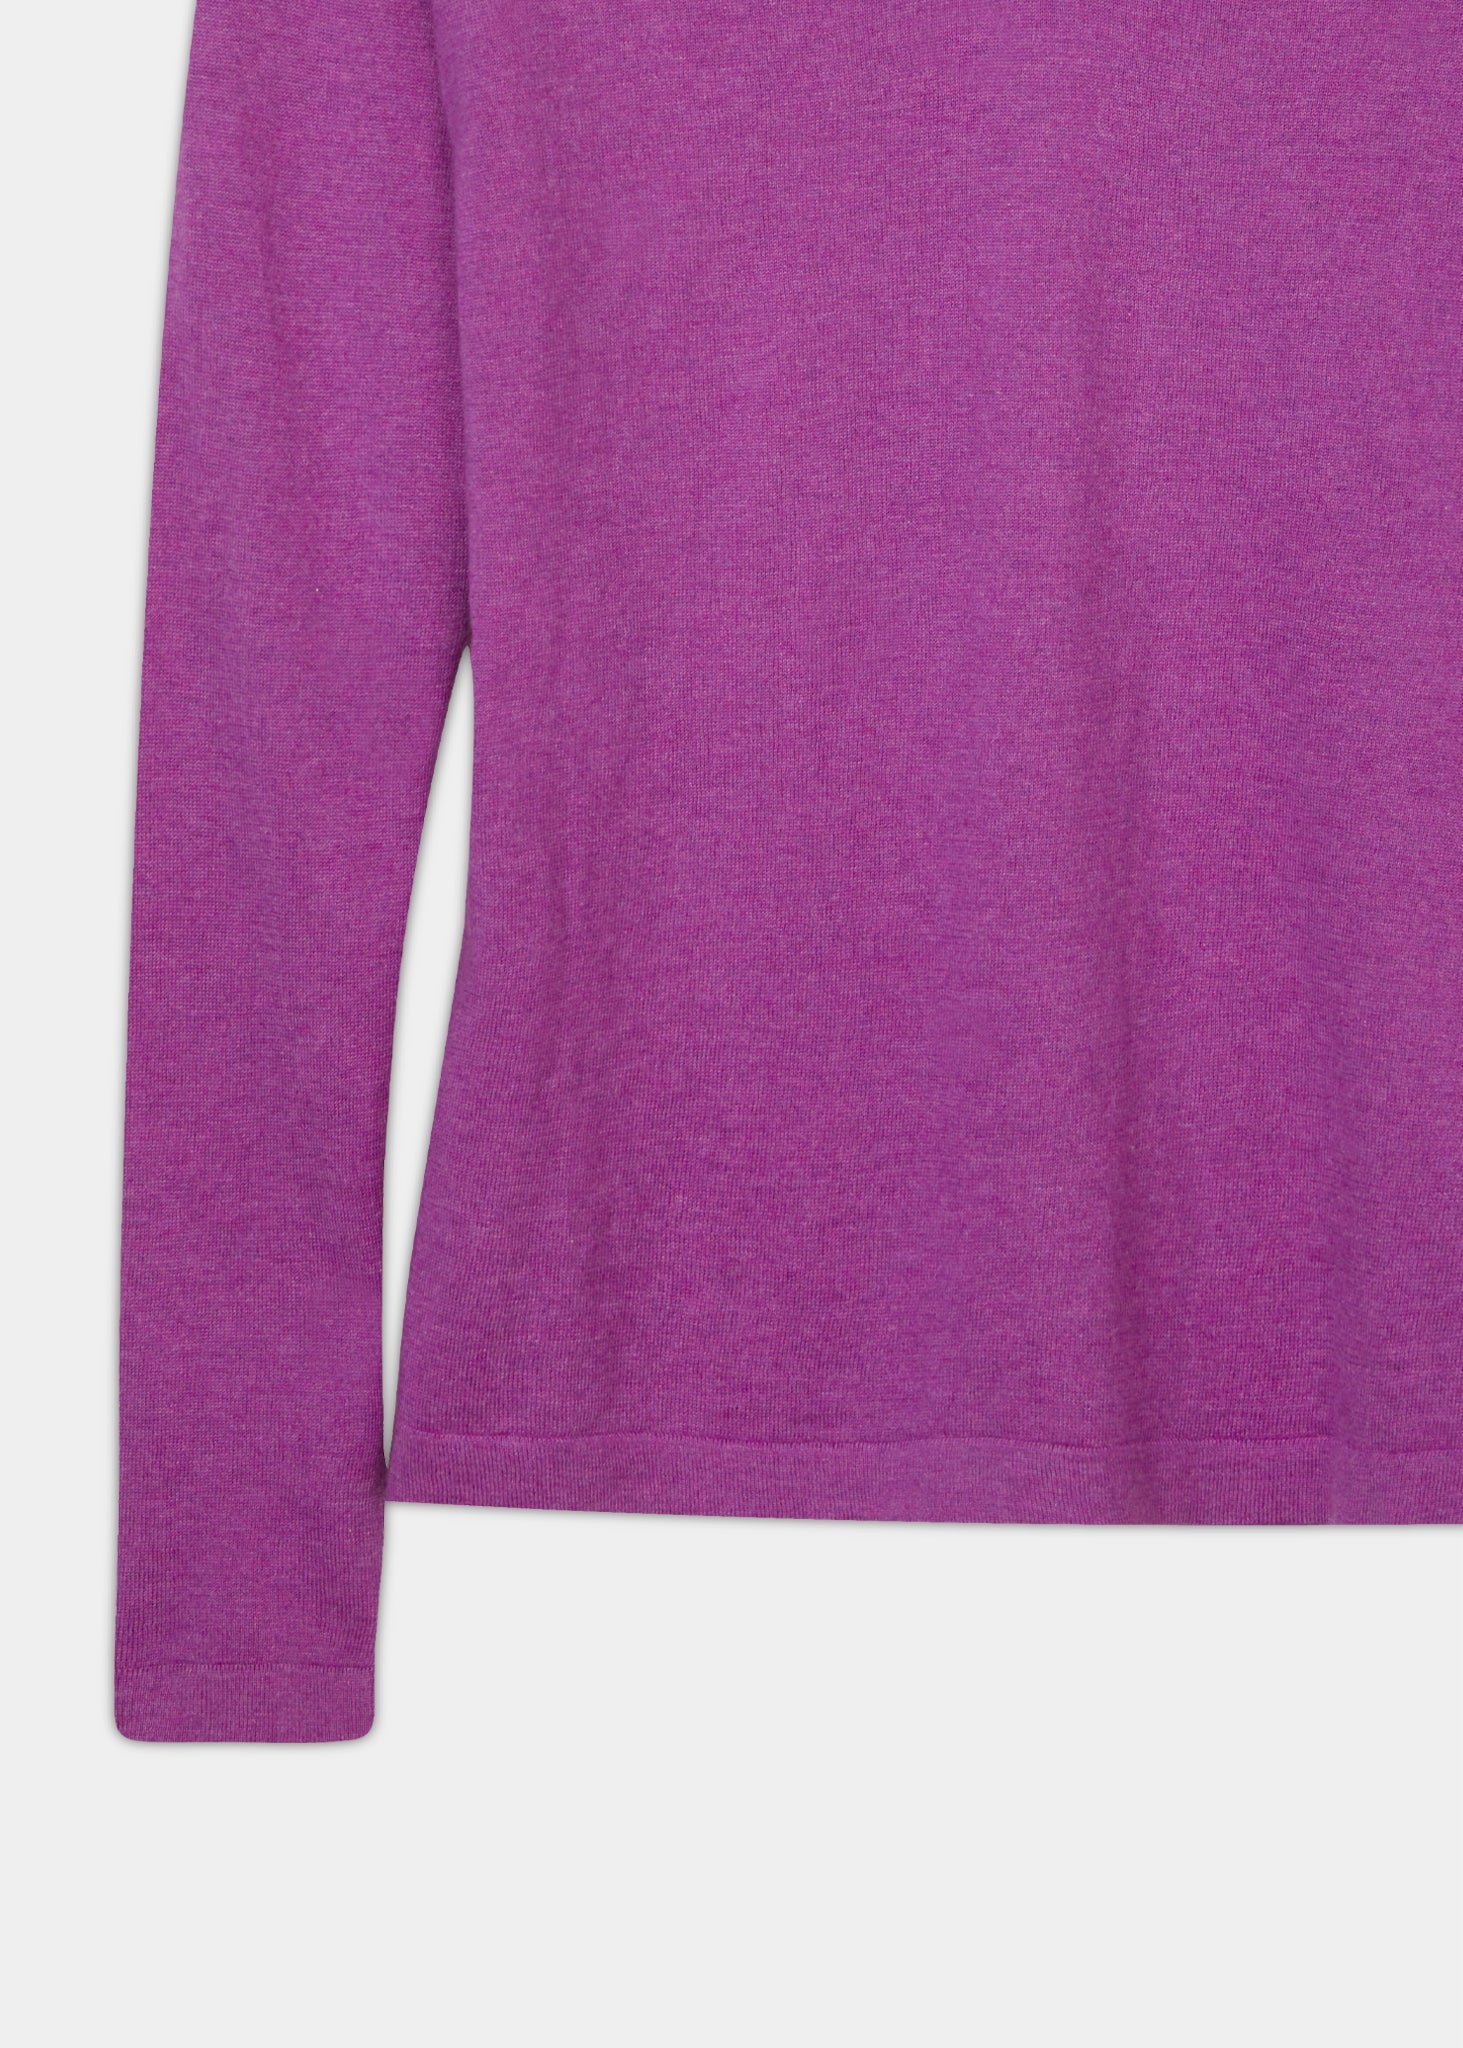 Ladies cotton cashmere jumper in colourway orchid with a vee neck